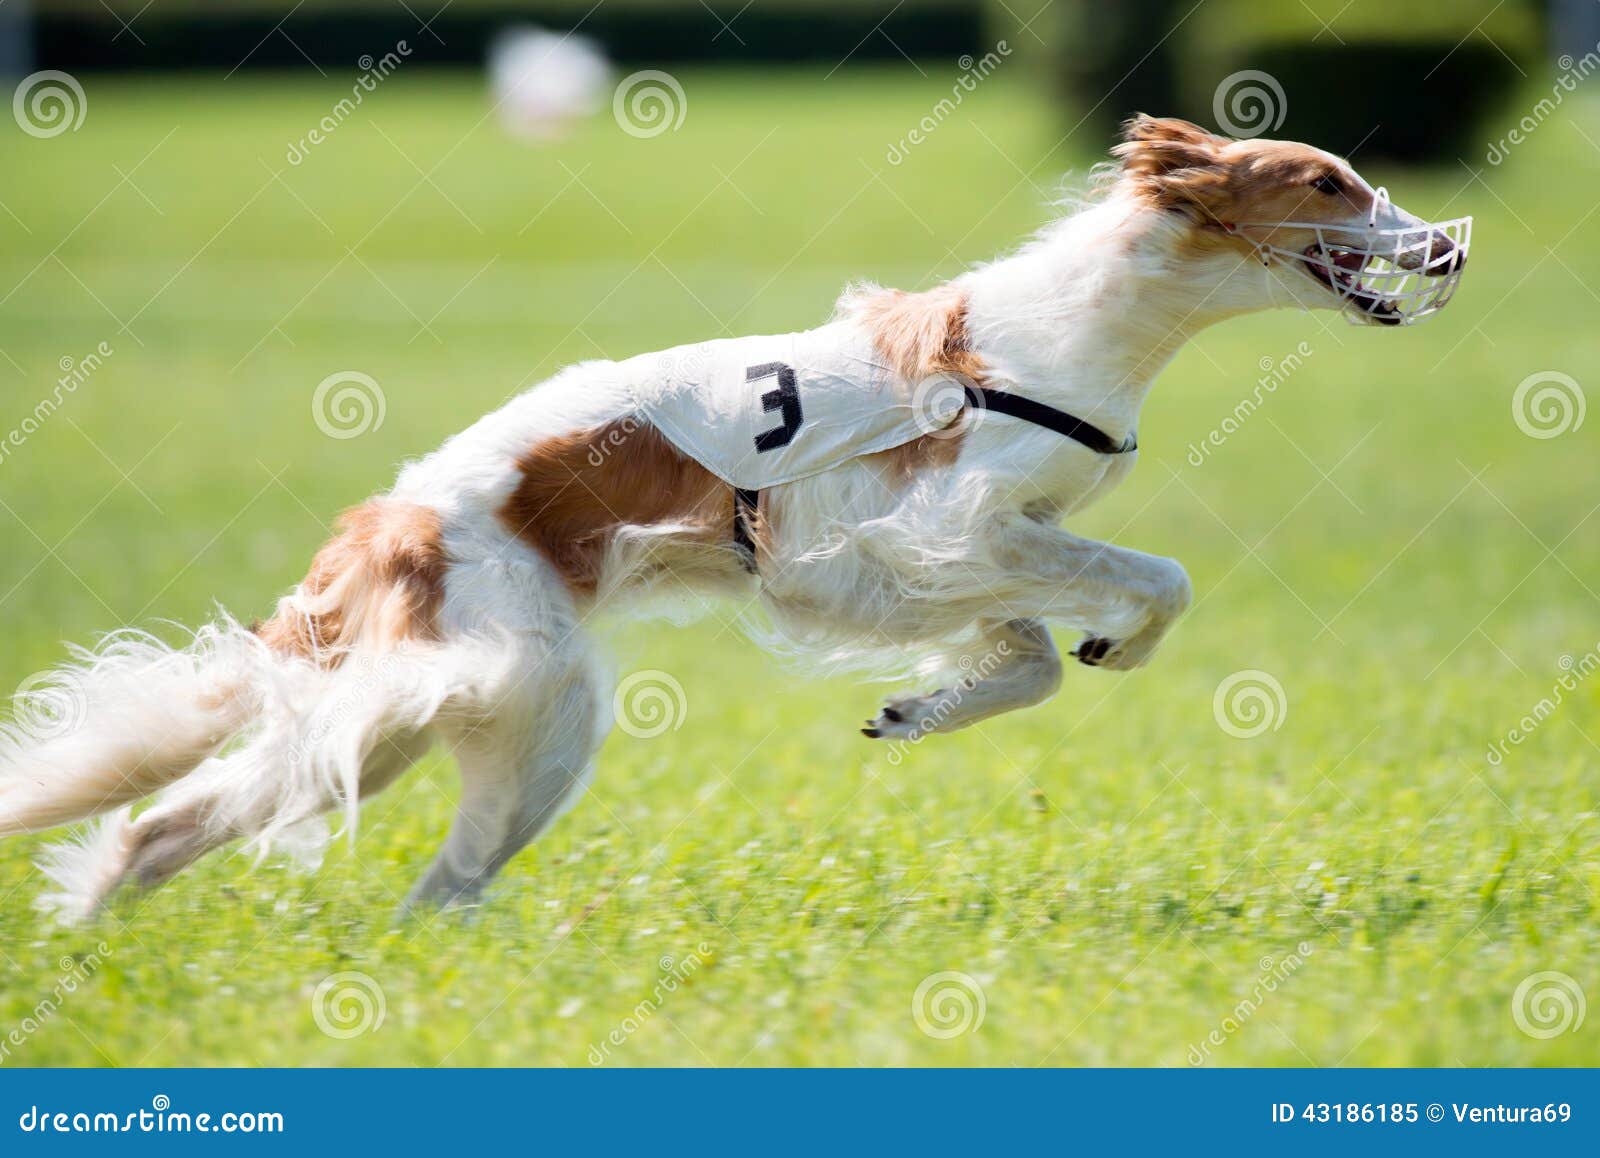 Lure coursing. Dog at full speed on coursing competition